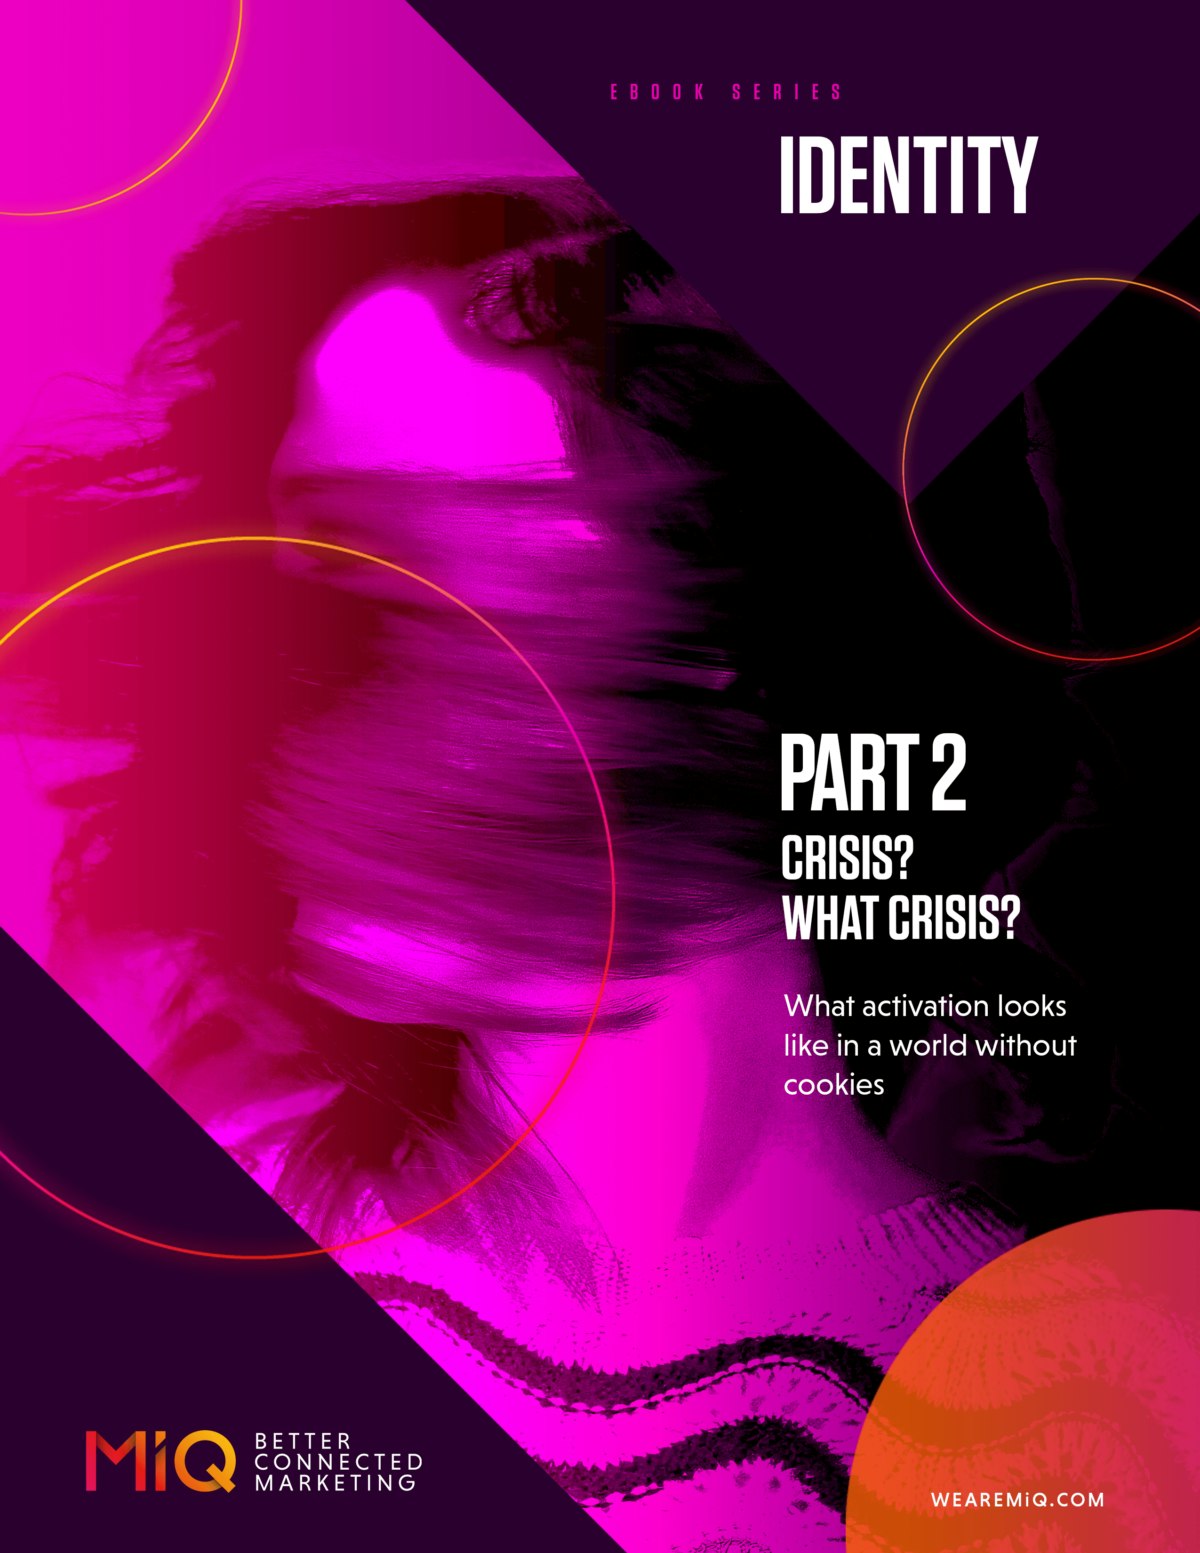 Identity: What activation looks like in a world without cookies